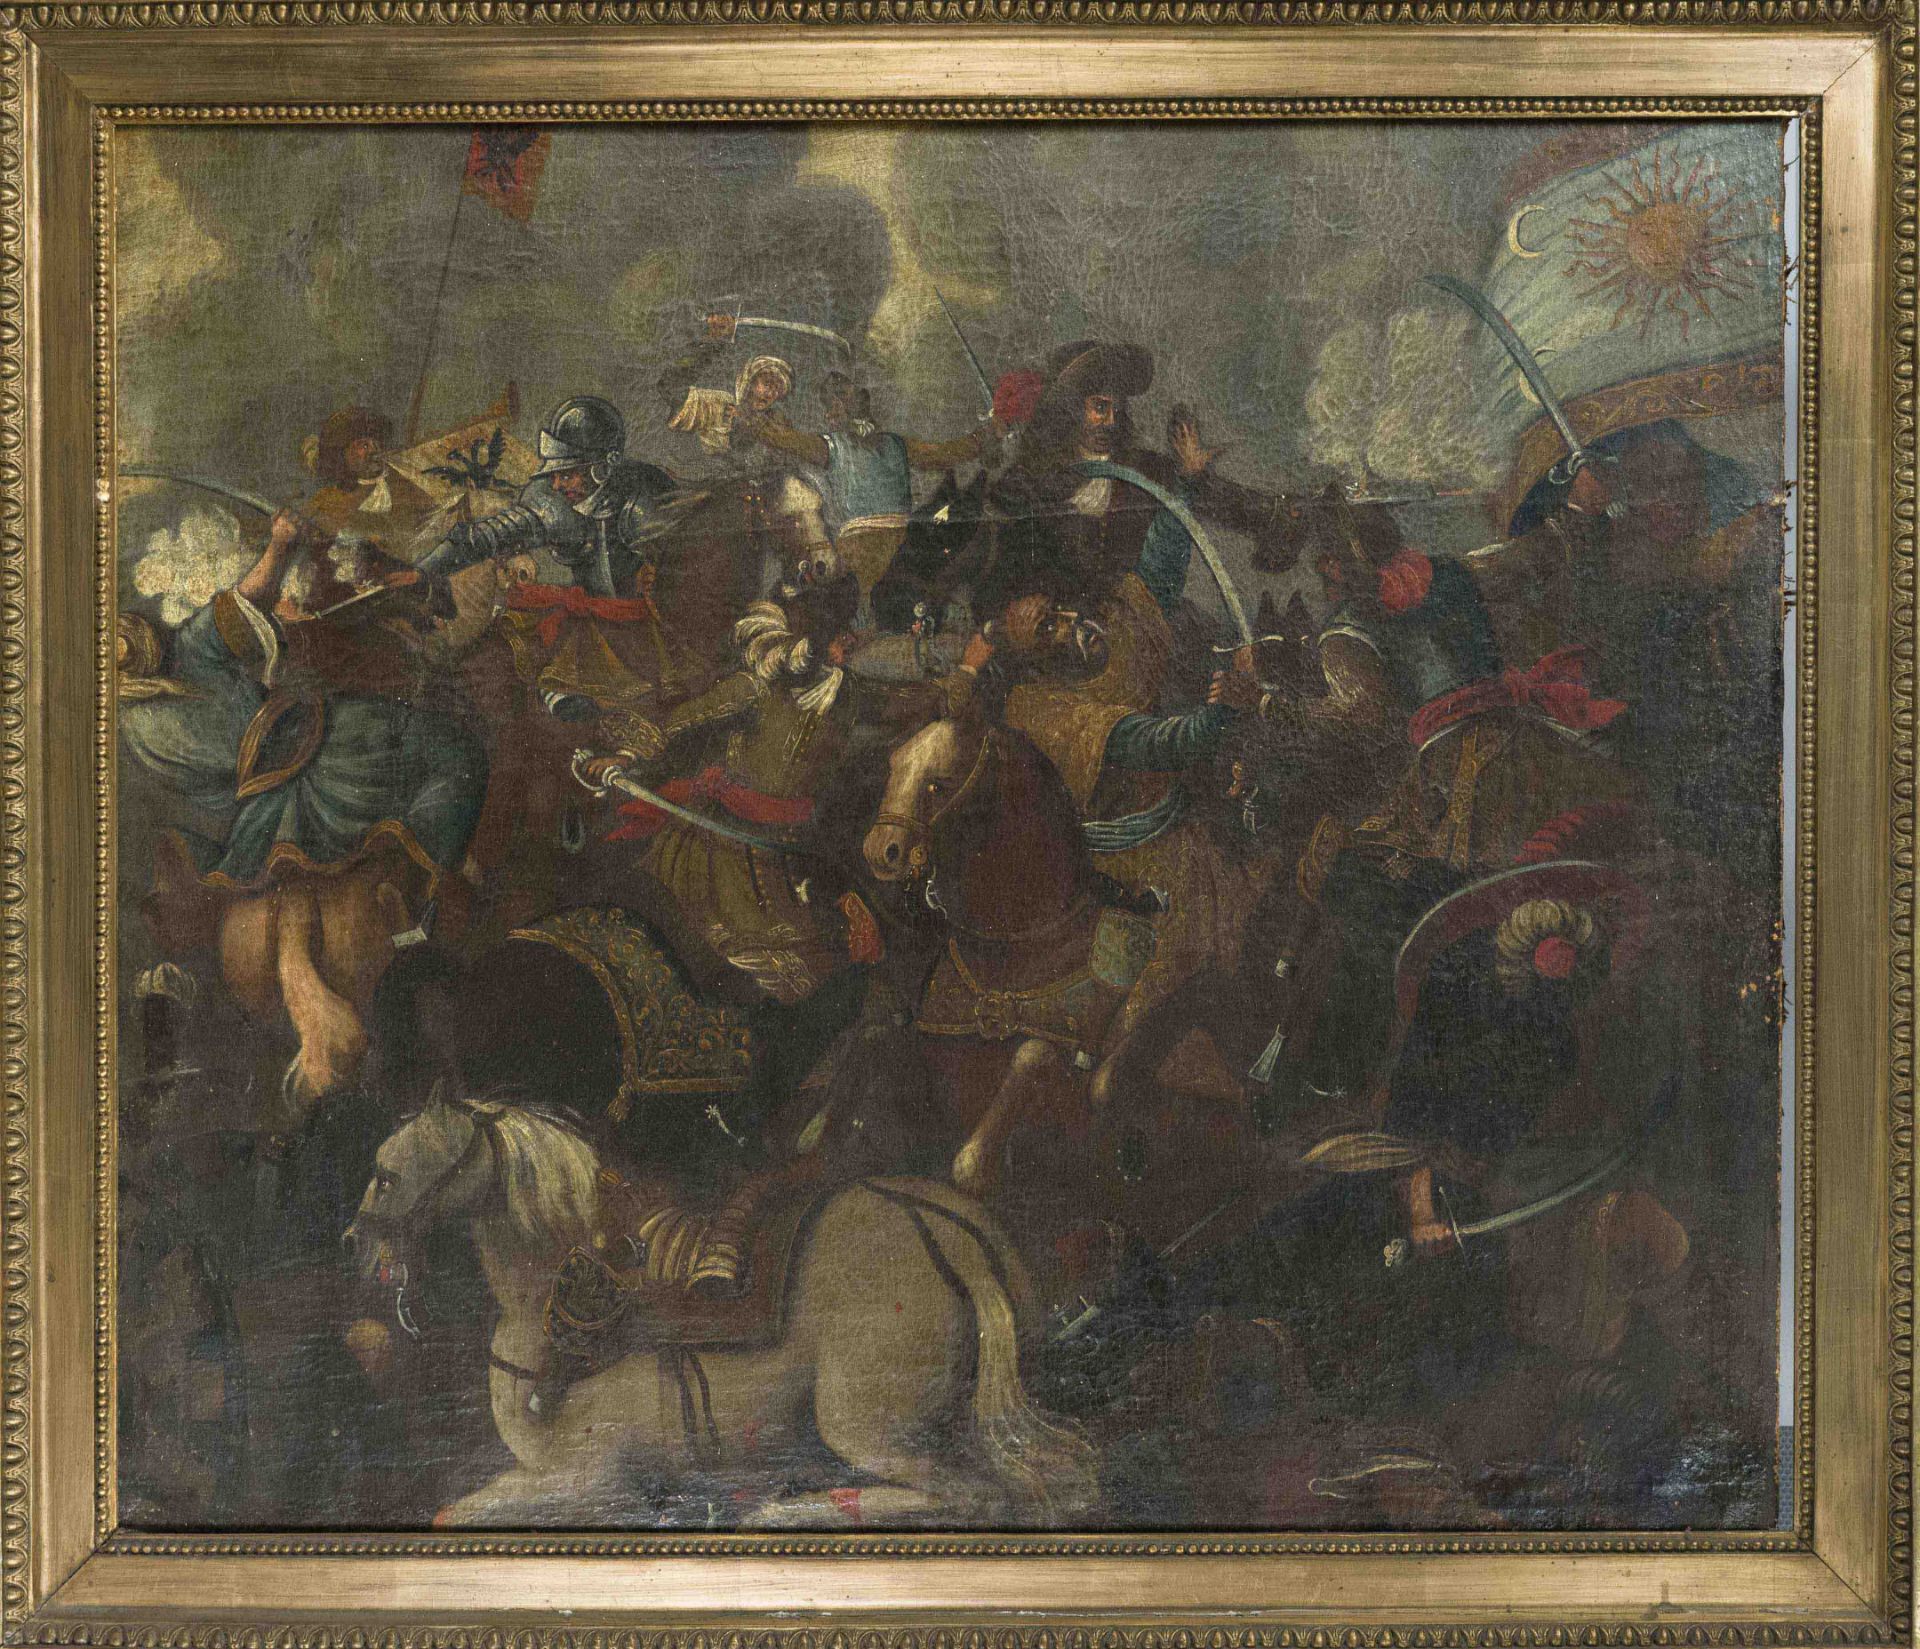 Unidentified history painter, c. 1700, large battle scene from the so-called Turkish Wars, the